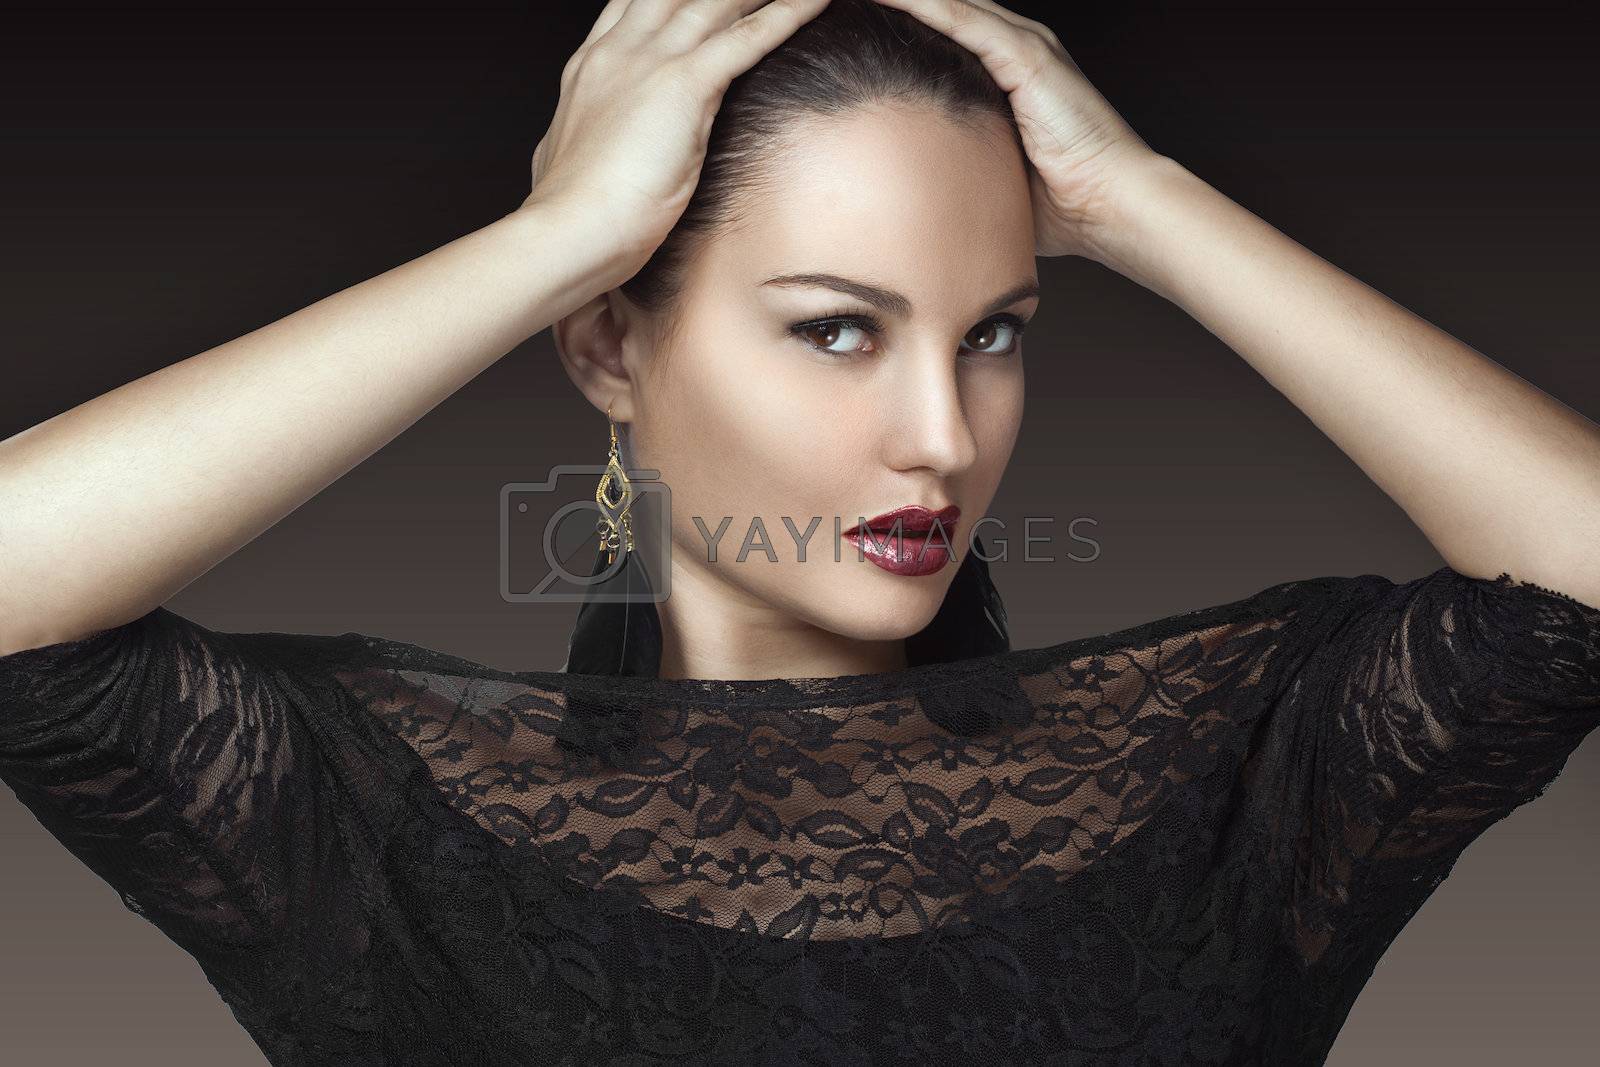 Portrait of beautiful woman with perfect make up over party lights